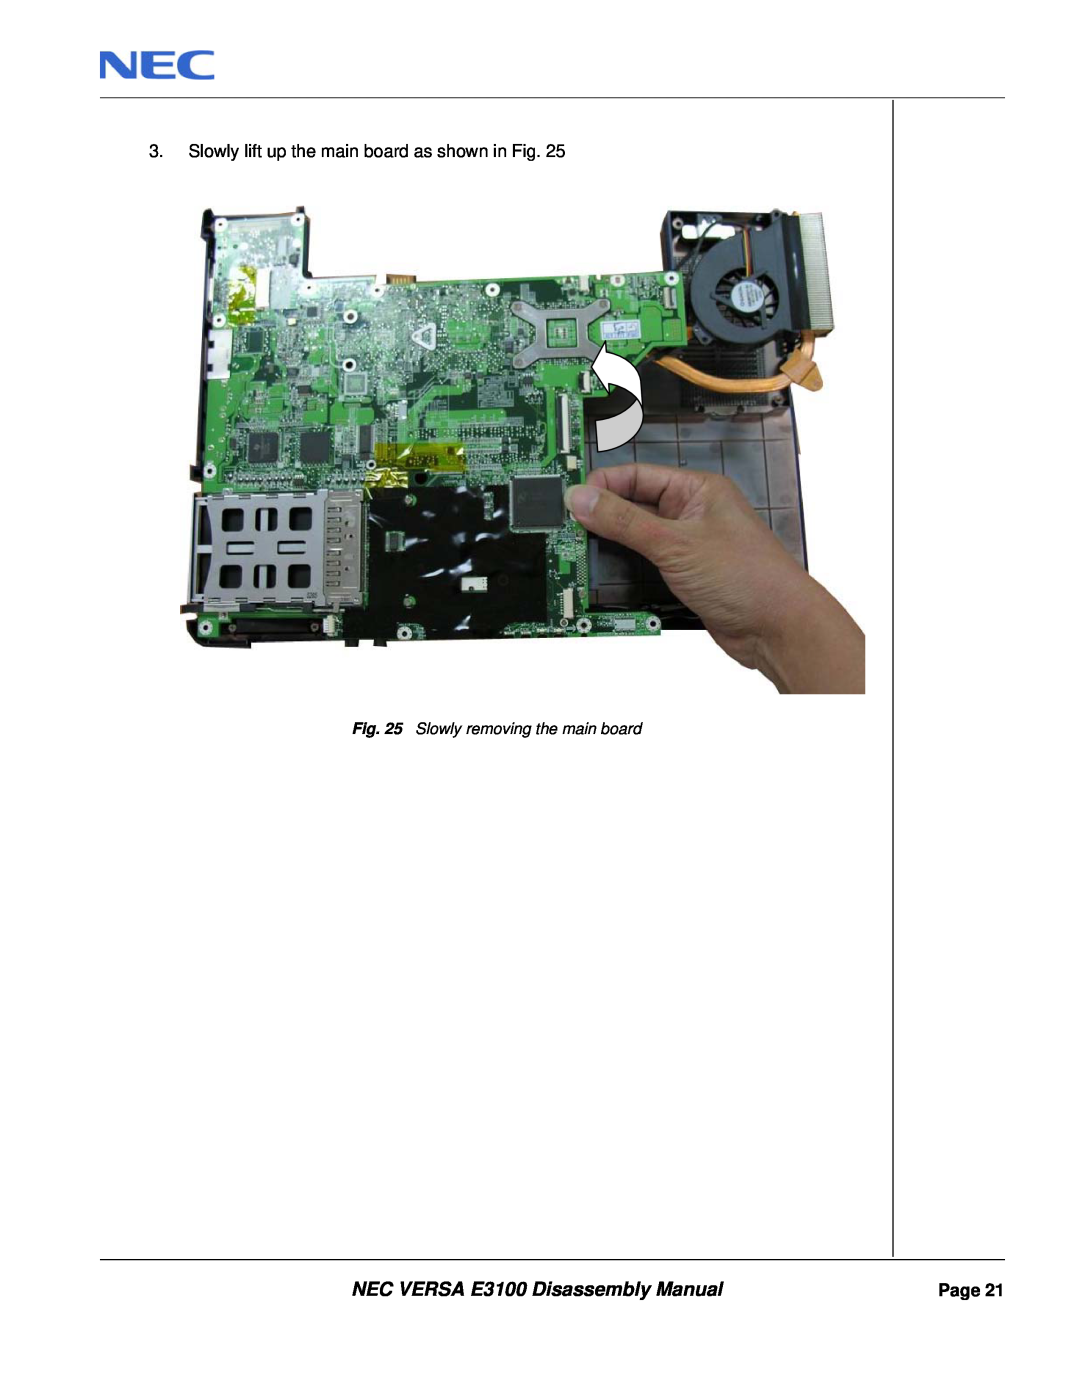 NEC NEC VERSA E3100 Disassembly Manual, Slowly lift up the main board as shown in Fig, Slowly removing the main board 